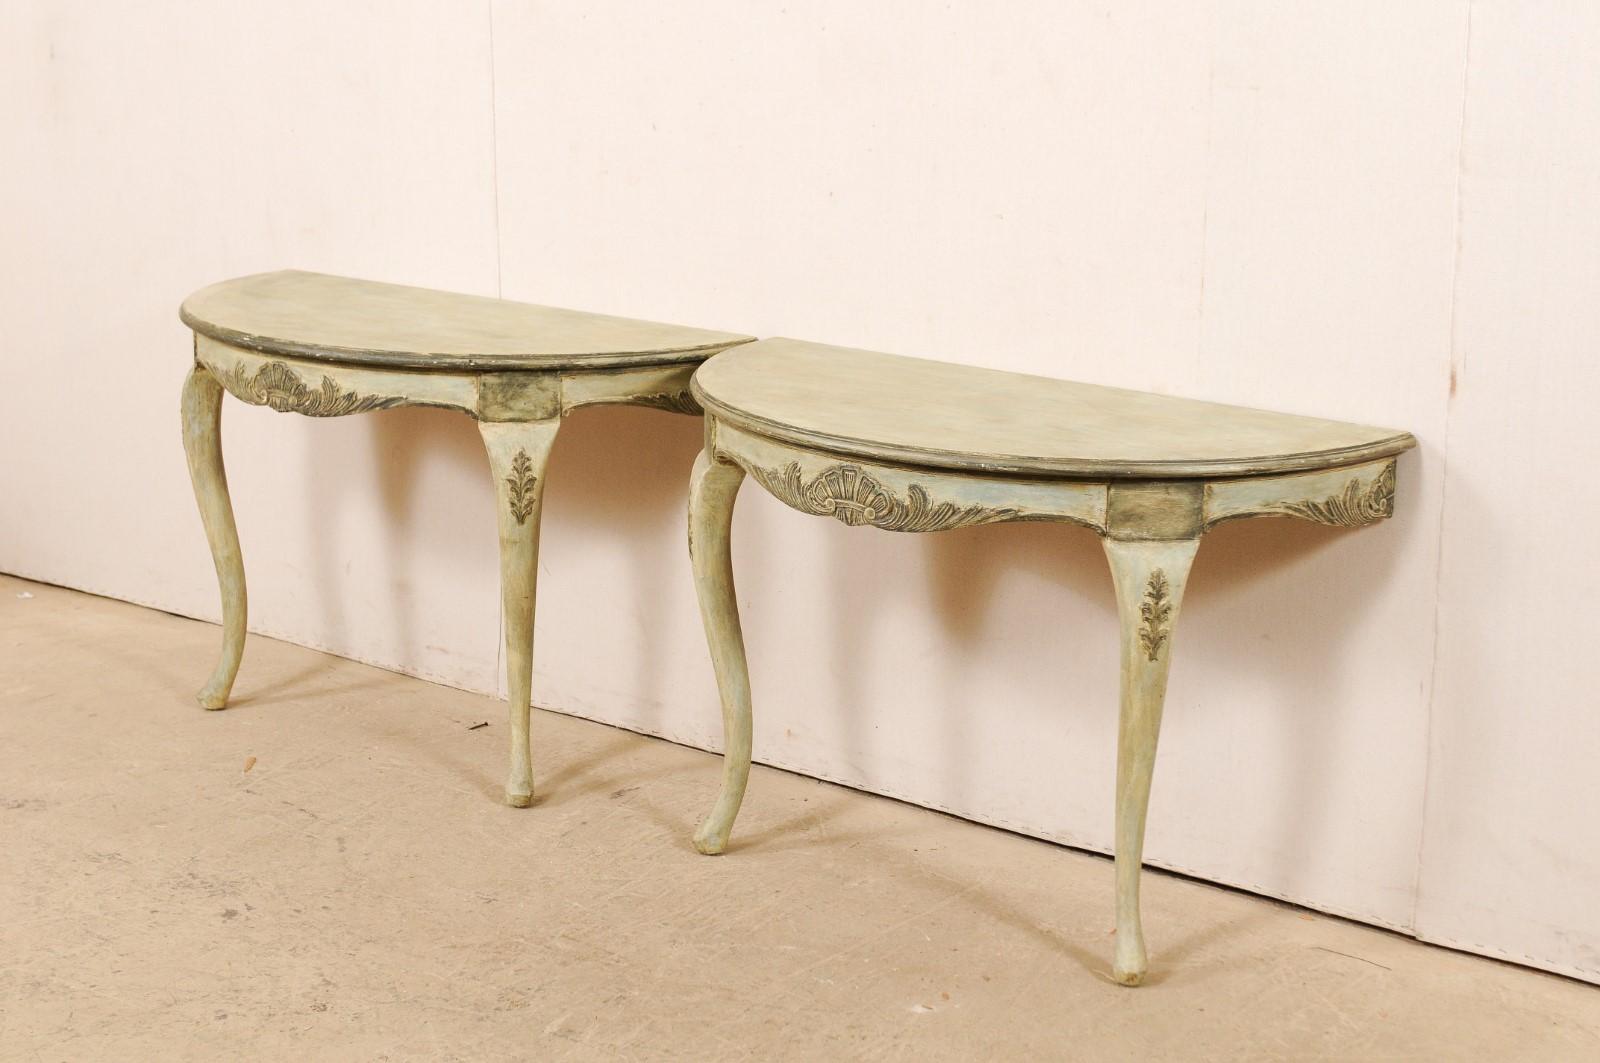 Swedish Pair of Wall-Mounted Demilune Tables with Carved Shell & Foliage Accents For Sale 4